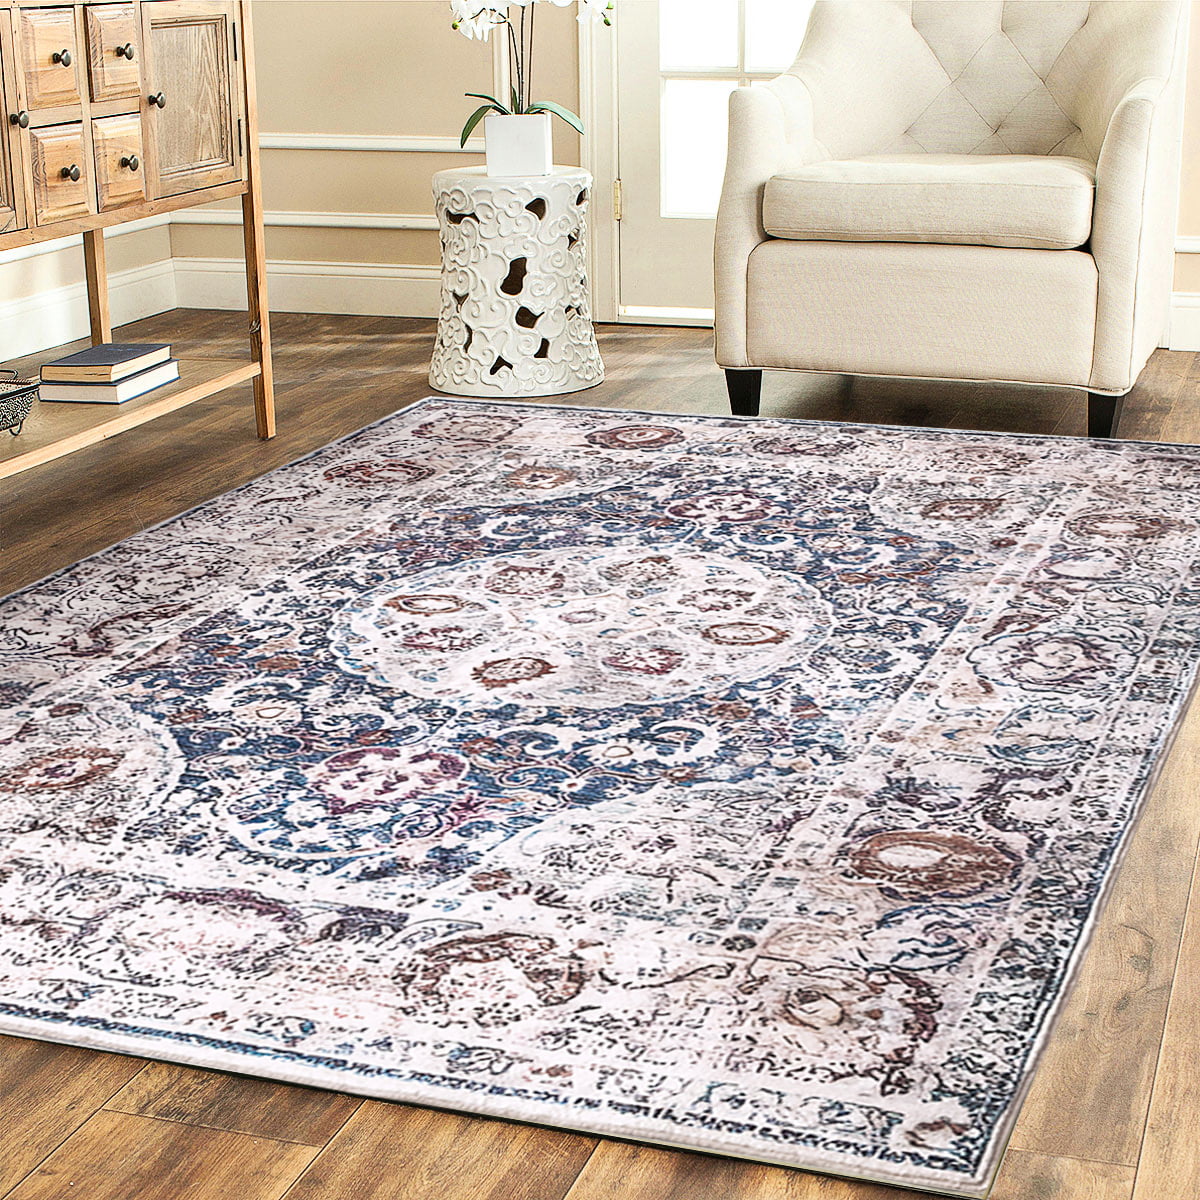 Neutral Decor & Floor Cover Gorgeous Persian Overdyed Powerloomed Soft Polypropylene Fiber Colorful Pink Grey Area Rug 2'2 x 7'6 Runner Bohemian Oriental Medallion Floral Pattern Boho Area Rug 